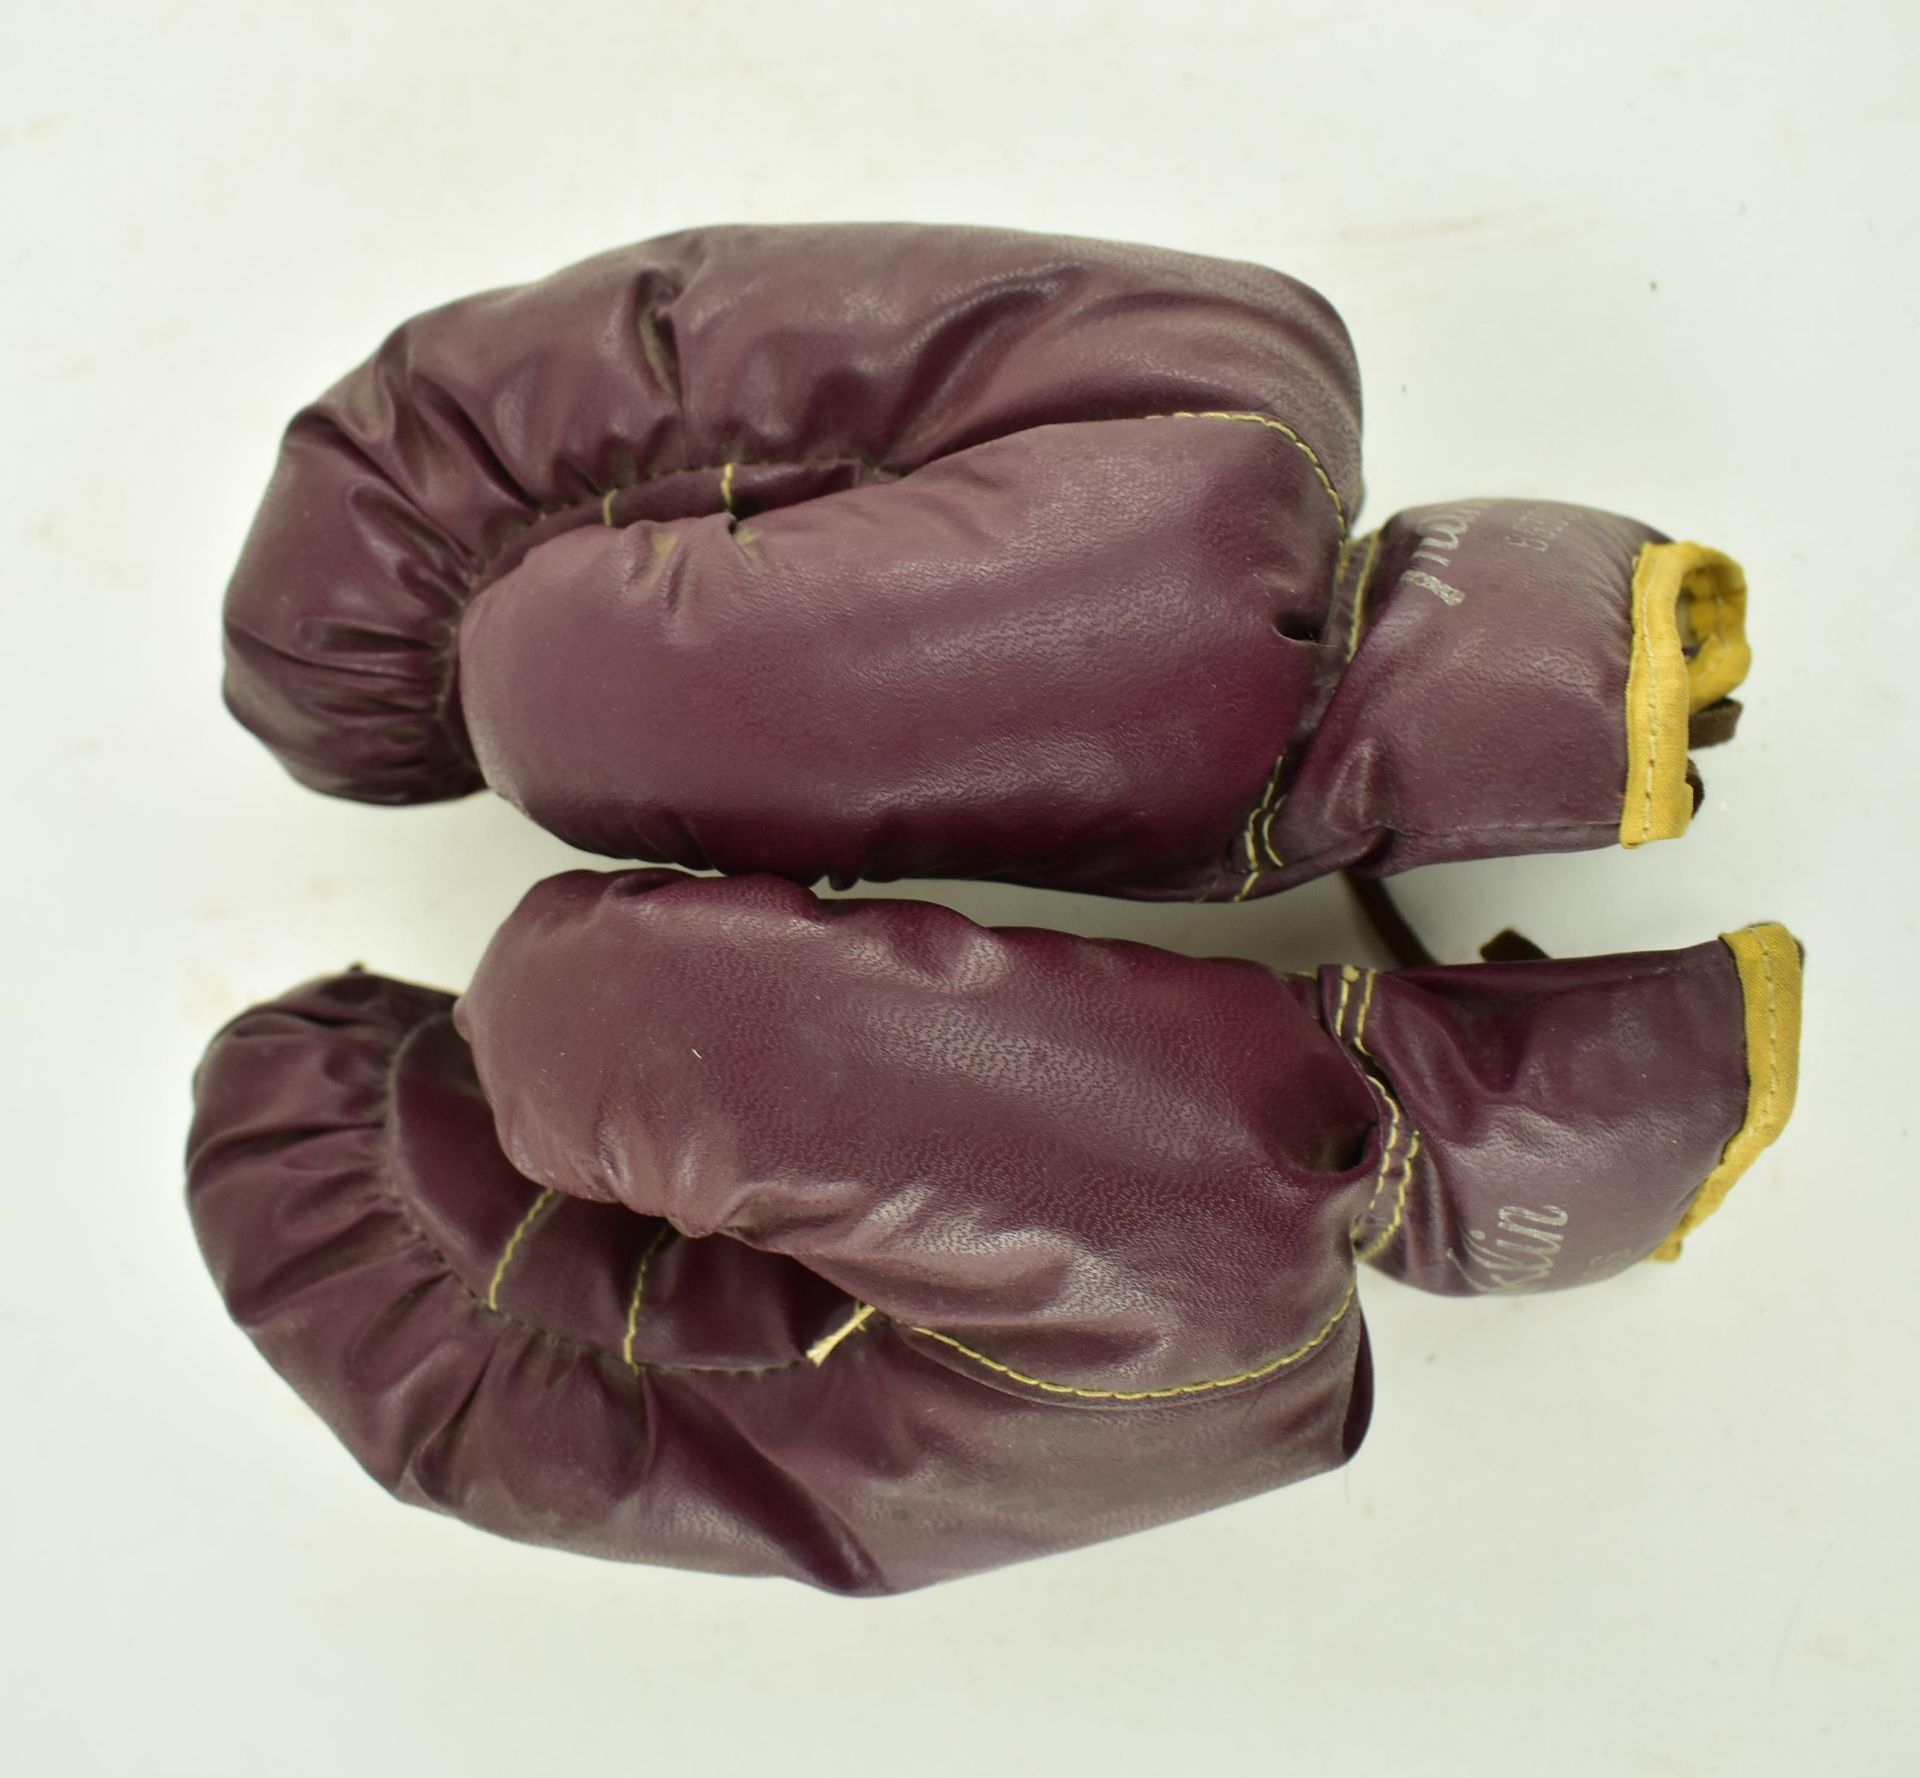 FRANKLIN - 1940S PAIR OF CHAMP BOXING GLOVES IN ORIGINAL BOX - Image 2 of 8